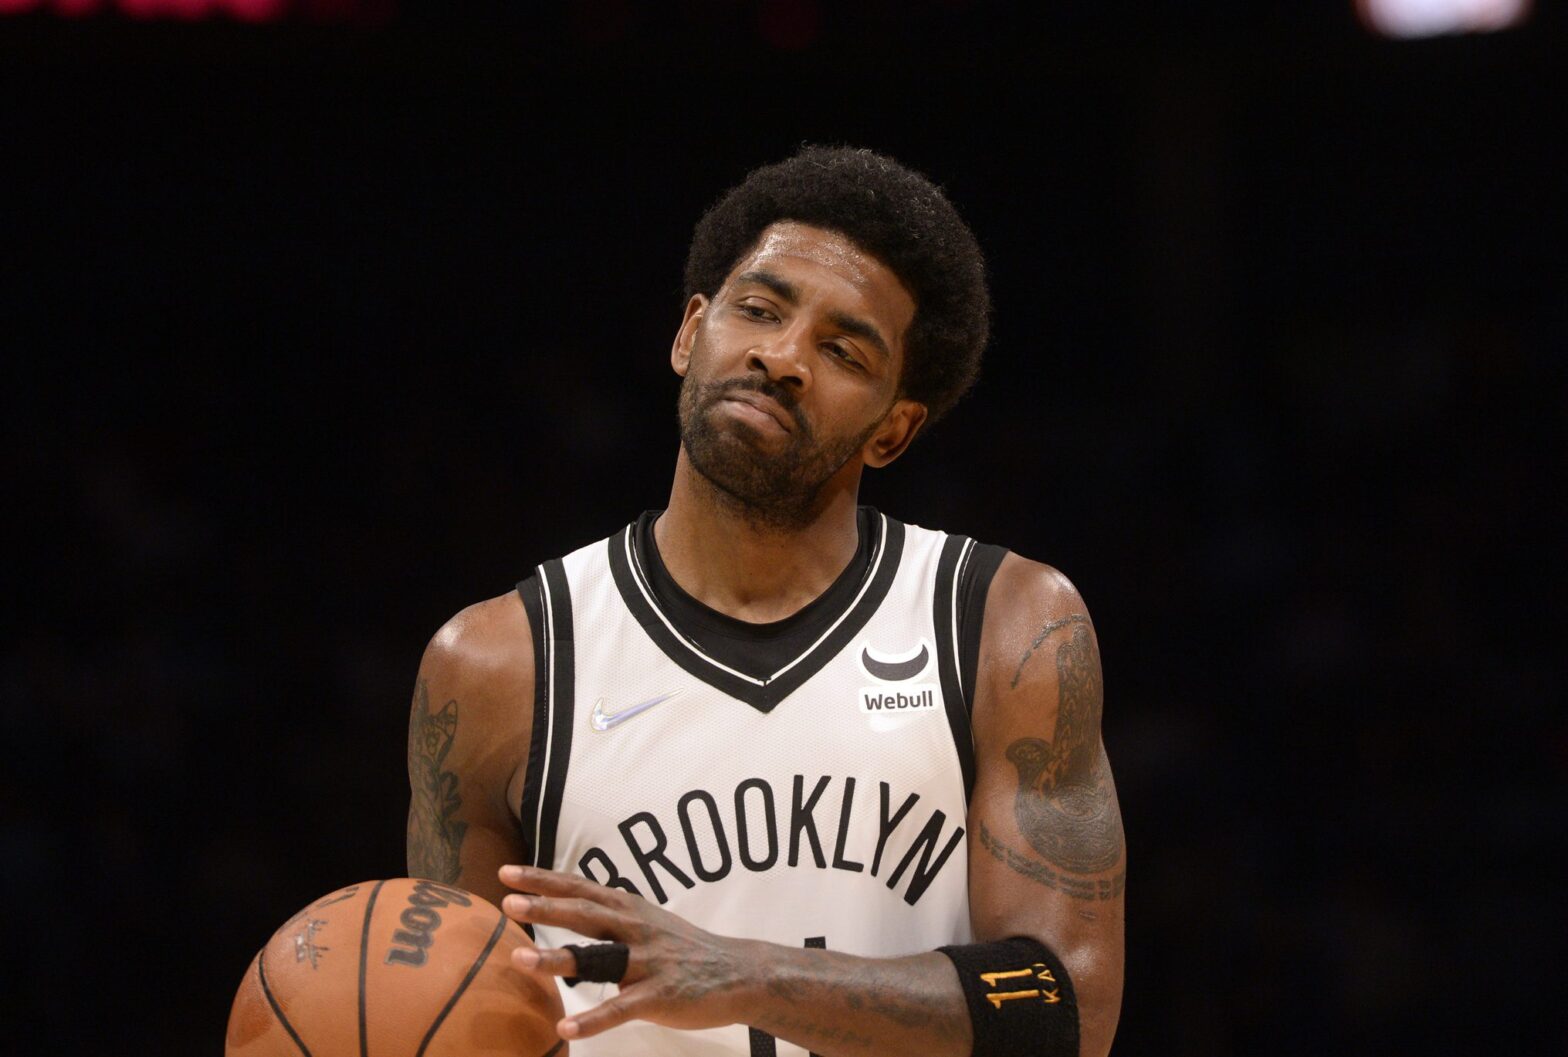 Kyrie Irving Wants Out of Brooklyn - Good Riddance